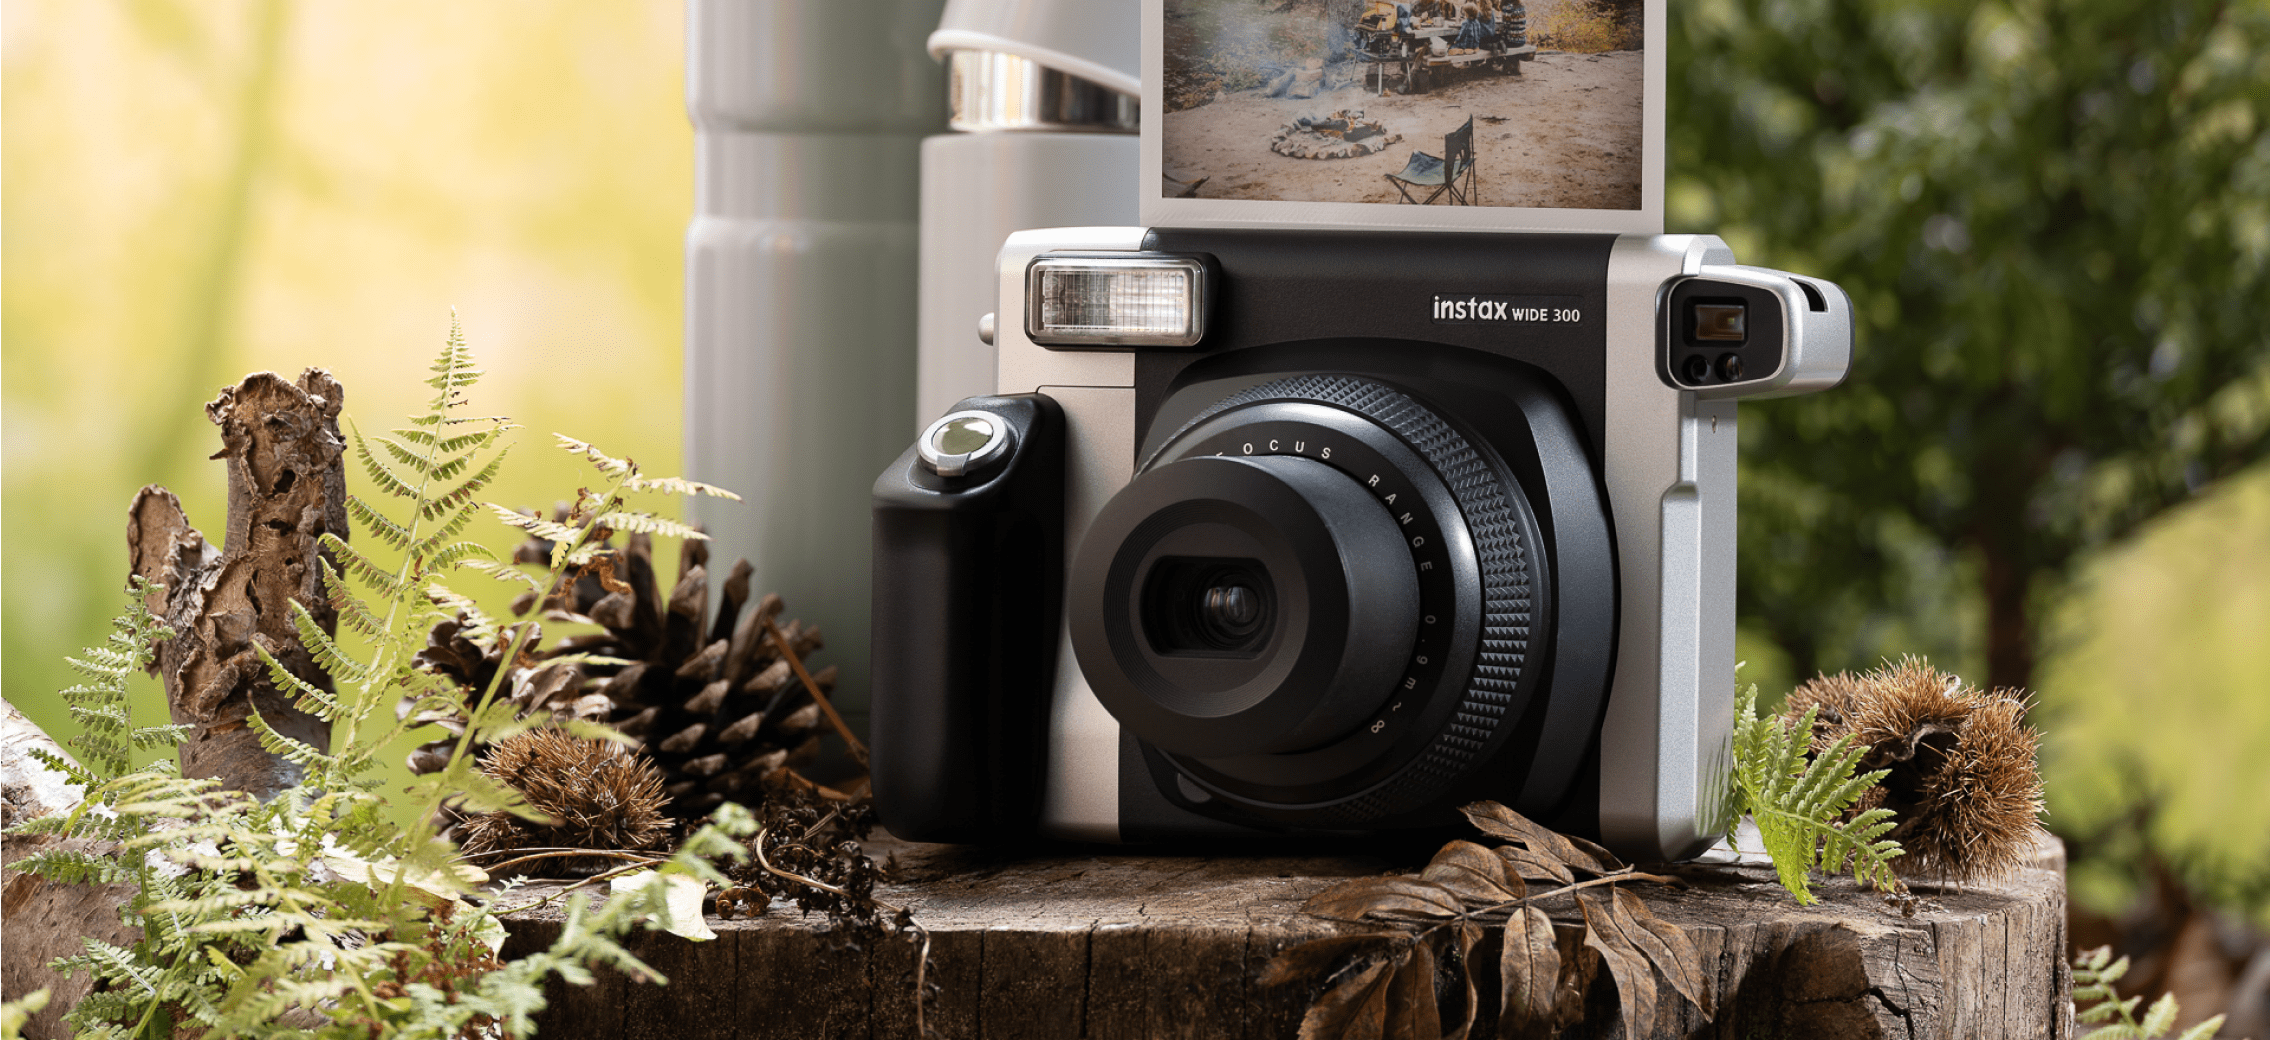 I want a new Fujifilm Instax Wide 300! Come on, where's the next camera?